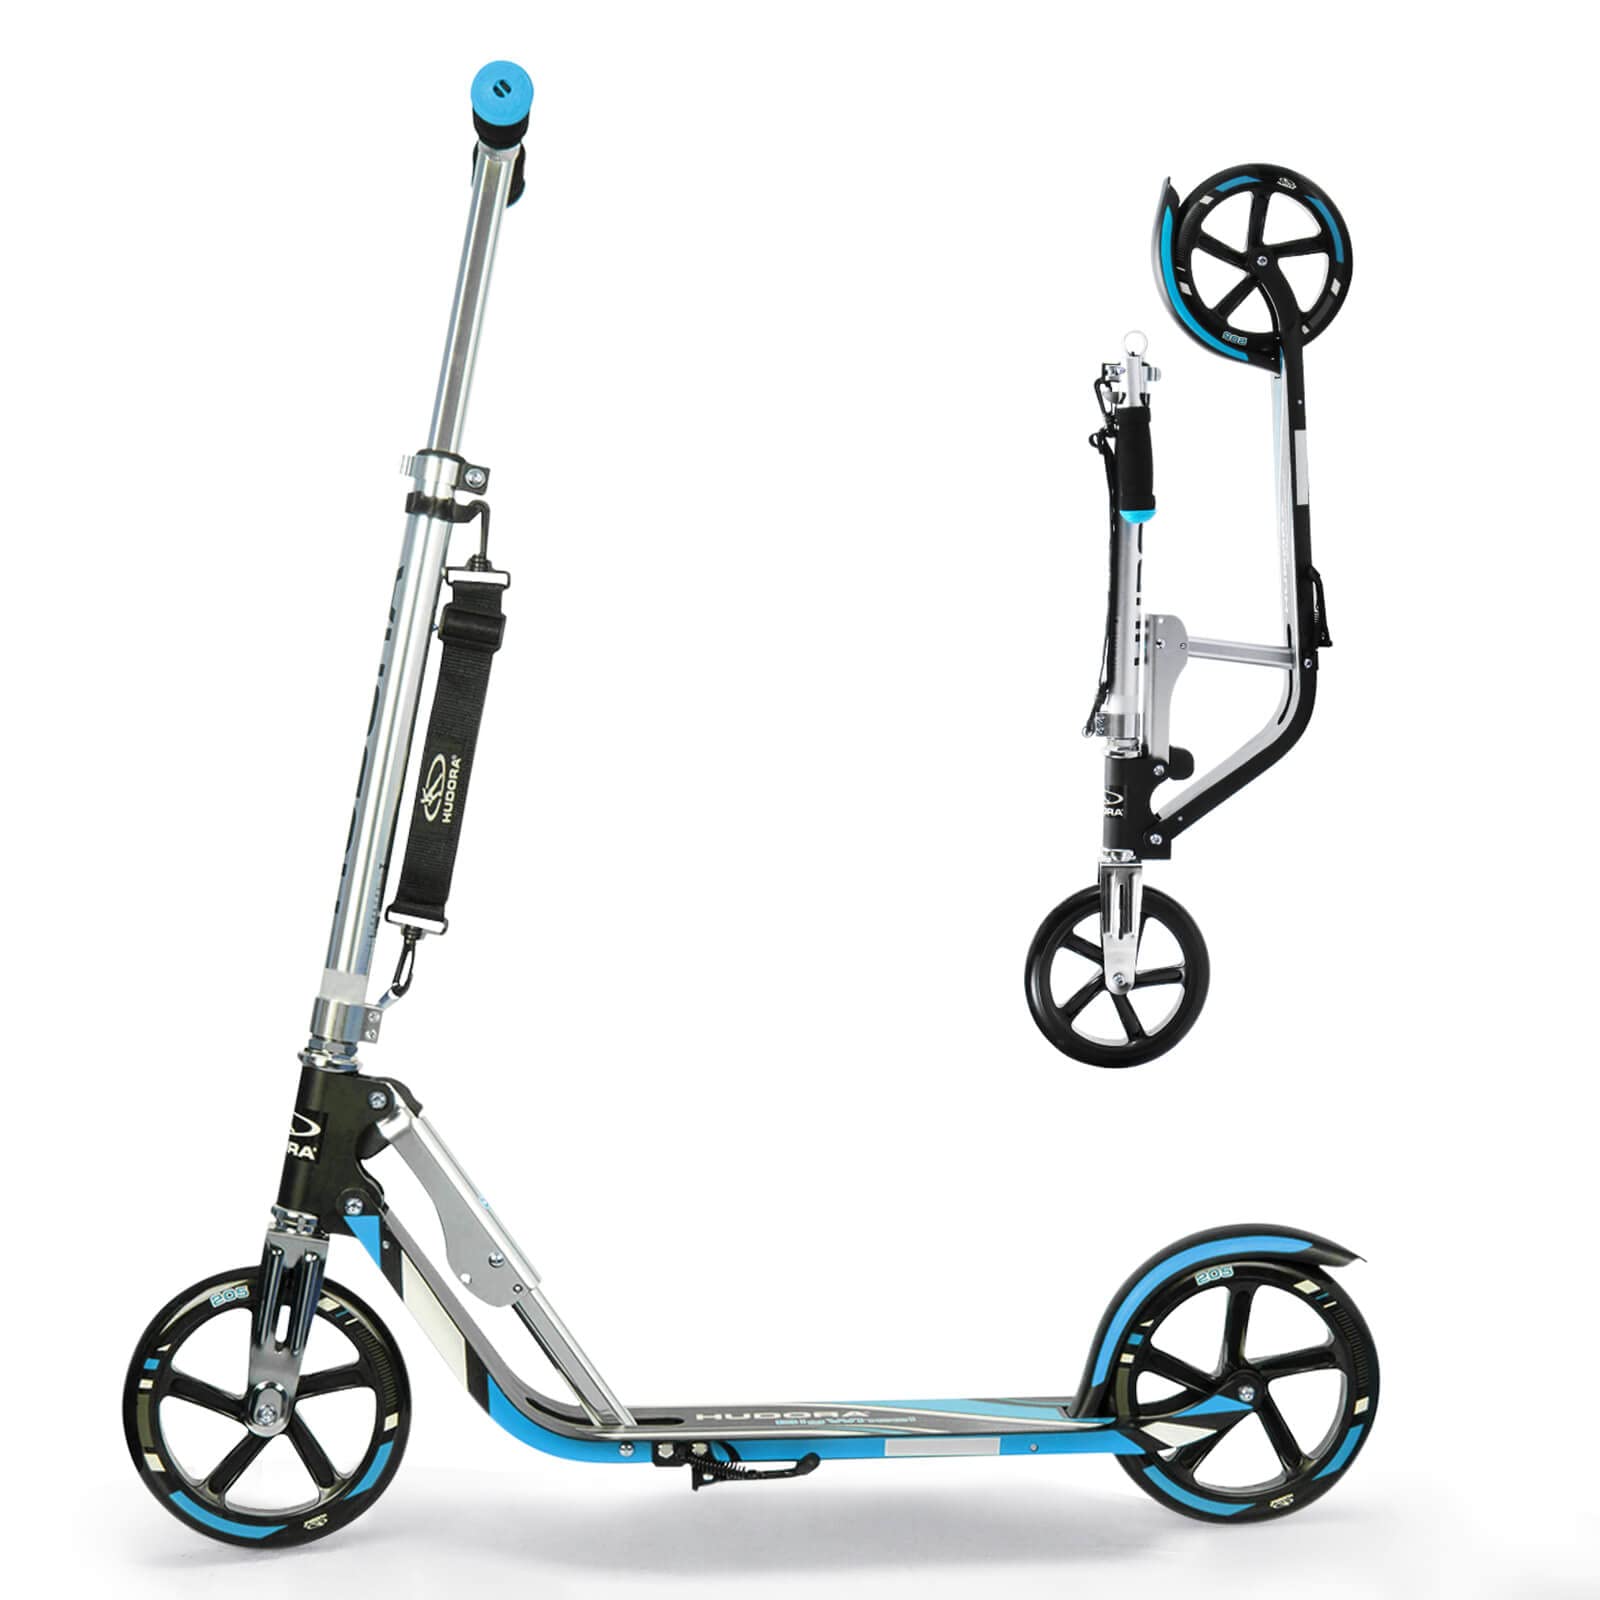 HUDORA Scooter for Kids Ages 6-12 - Scooters for Teens 12 Years and Up Adult Scooter with Big Wheel Scooter for Kids 8 Years and